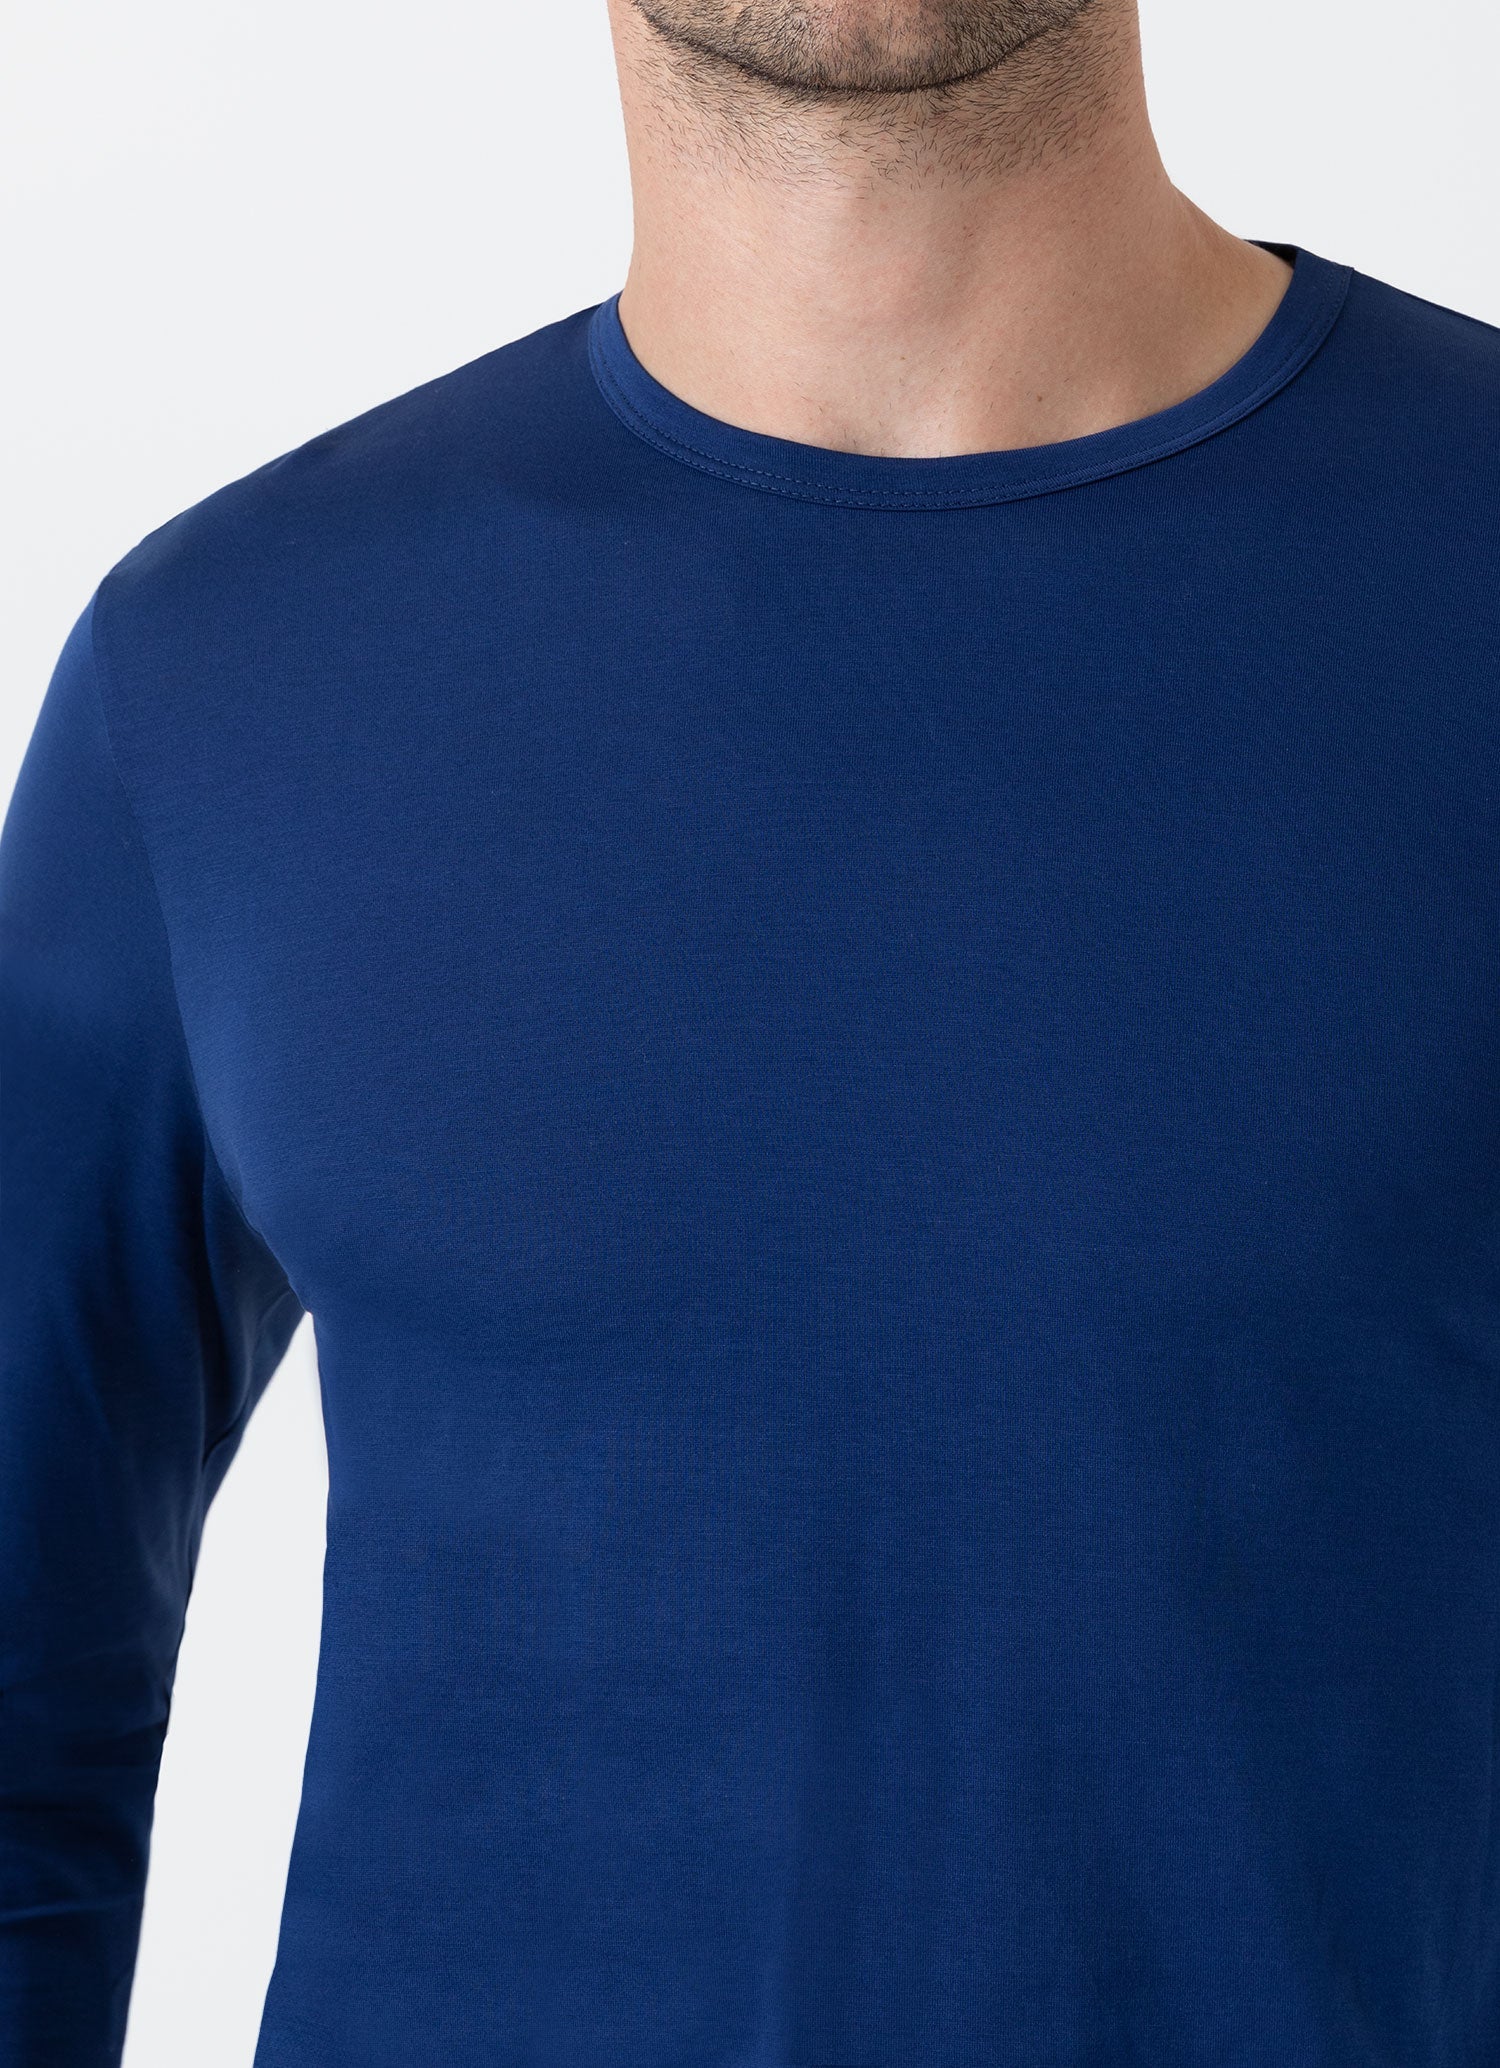 Men's Classic Long Sleeve T-shirt in Space Blue